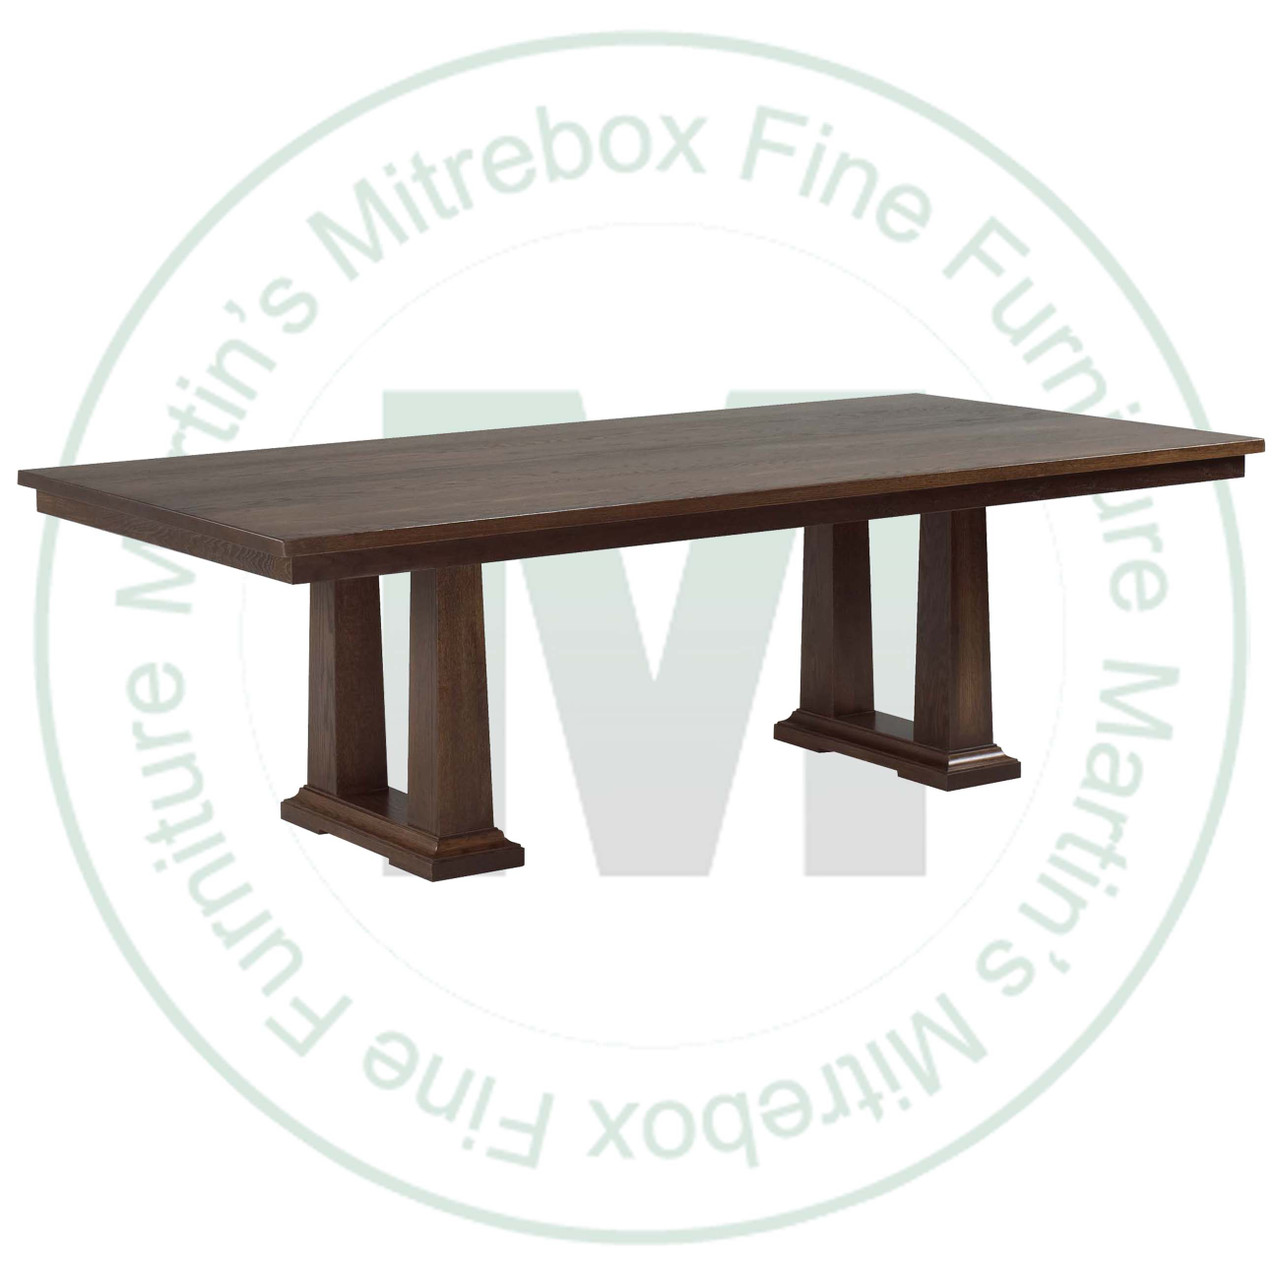 Maple Acropolis Extension Double Pedestal Table 48''D x 84''W x 30''H With 3 - 12'' Leaves Table Has 1.25'' Thick Top